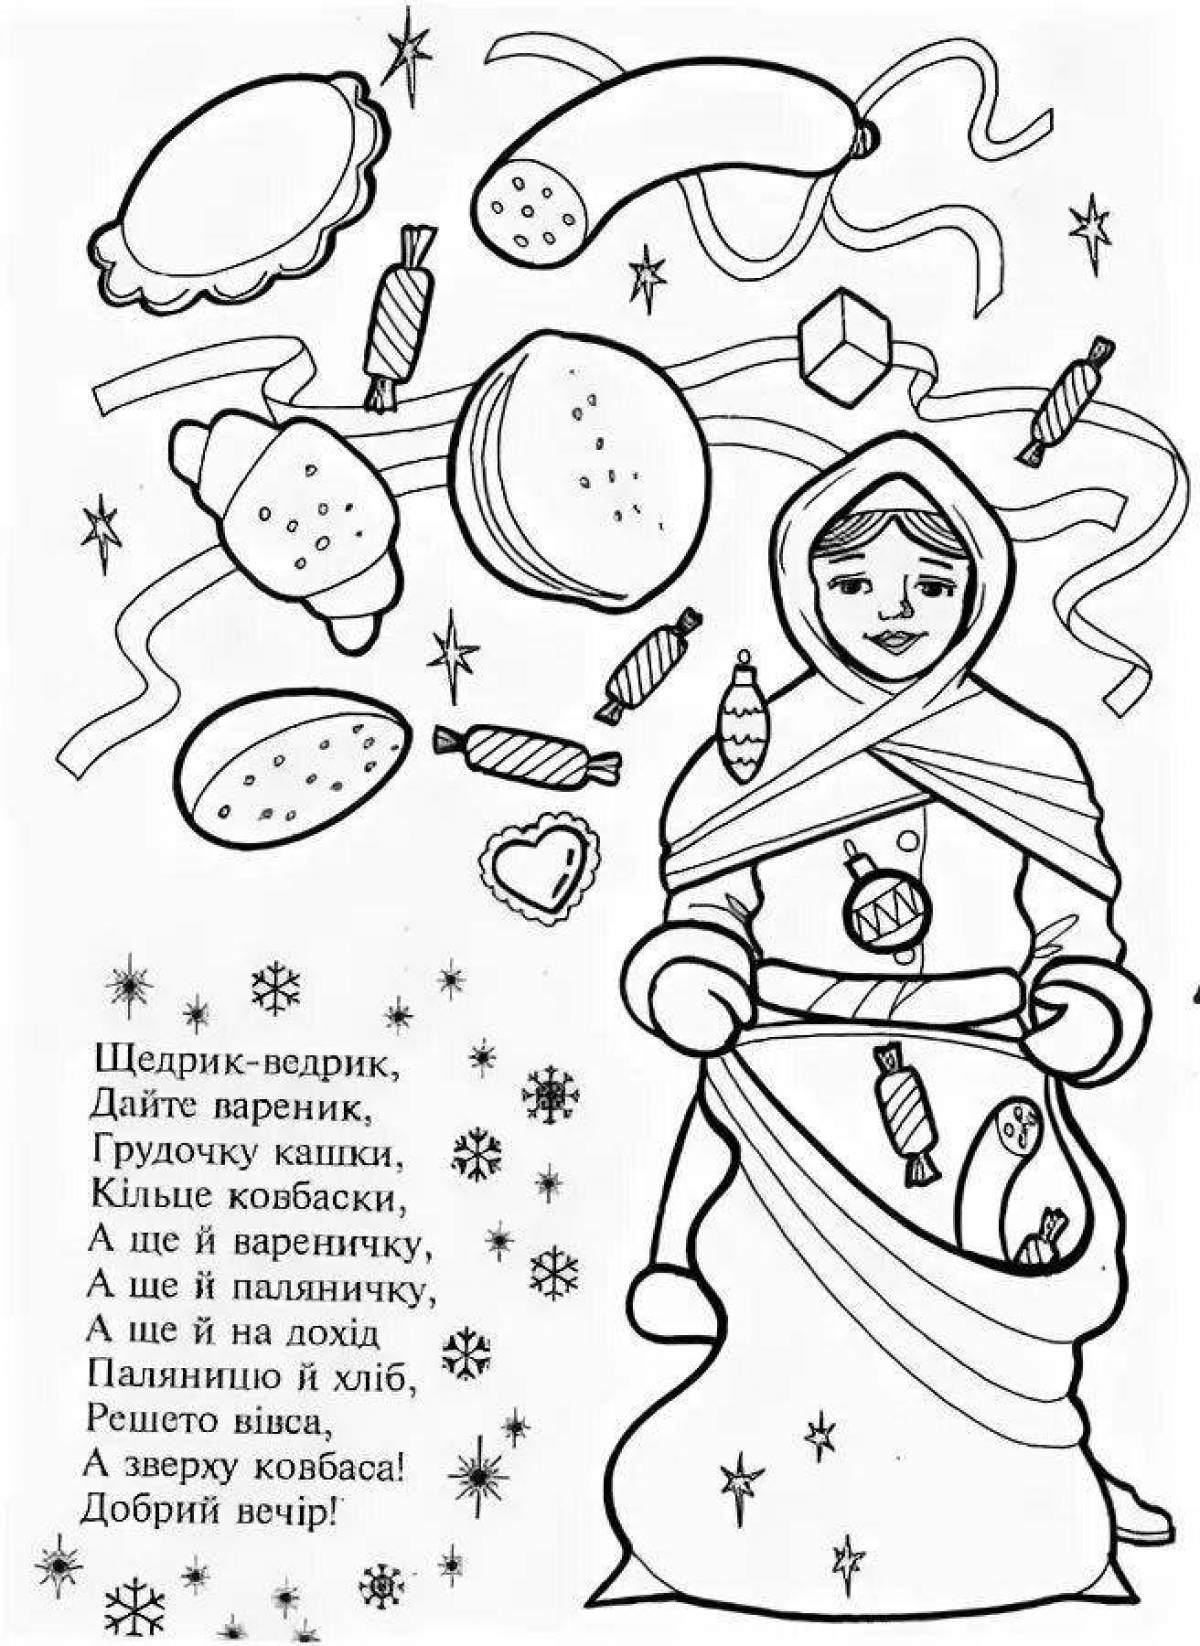 Animated carol coloring page for kids